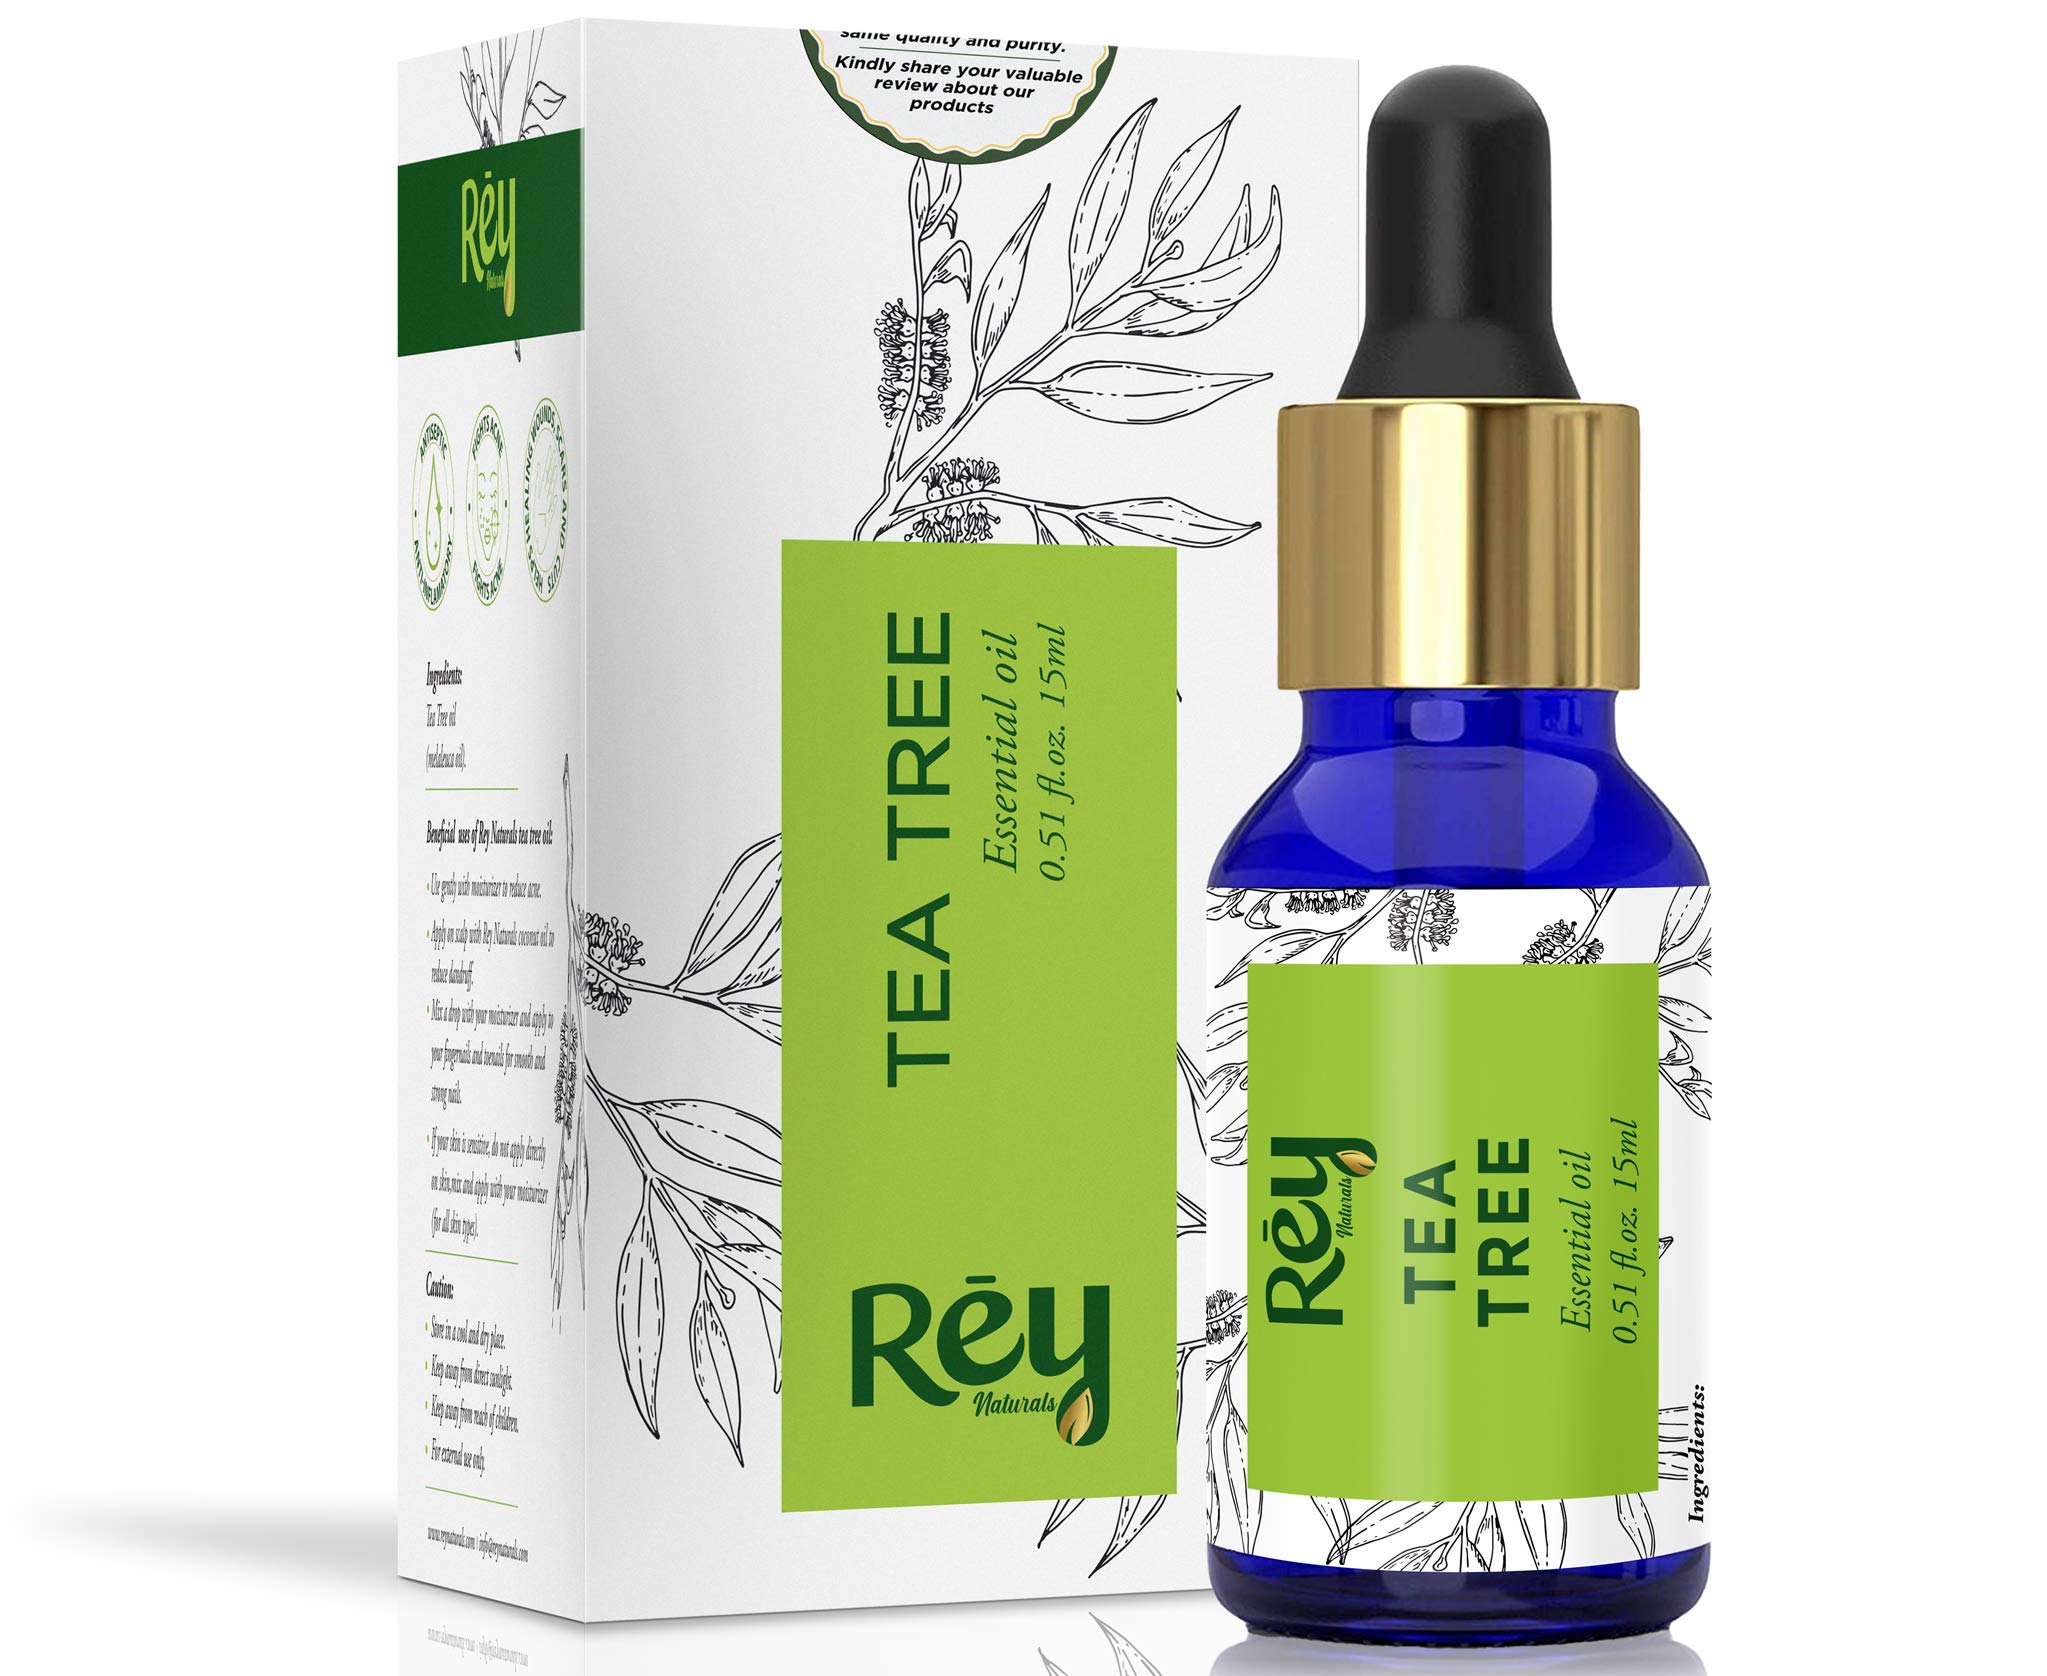 Rey Naturals Tea tree oil for Aromatherapy - Tea Tree Essential Oil for Healthy Skin, Face, and Hair - 100% Organic Remedy for Dandruff, Acne - 30 ml (15 ml x 2) super saver combo